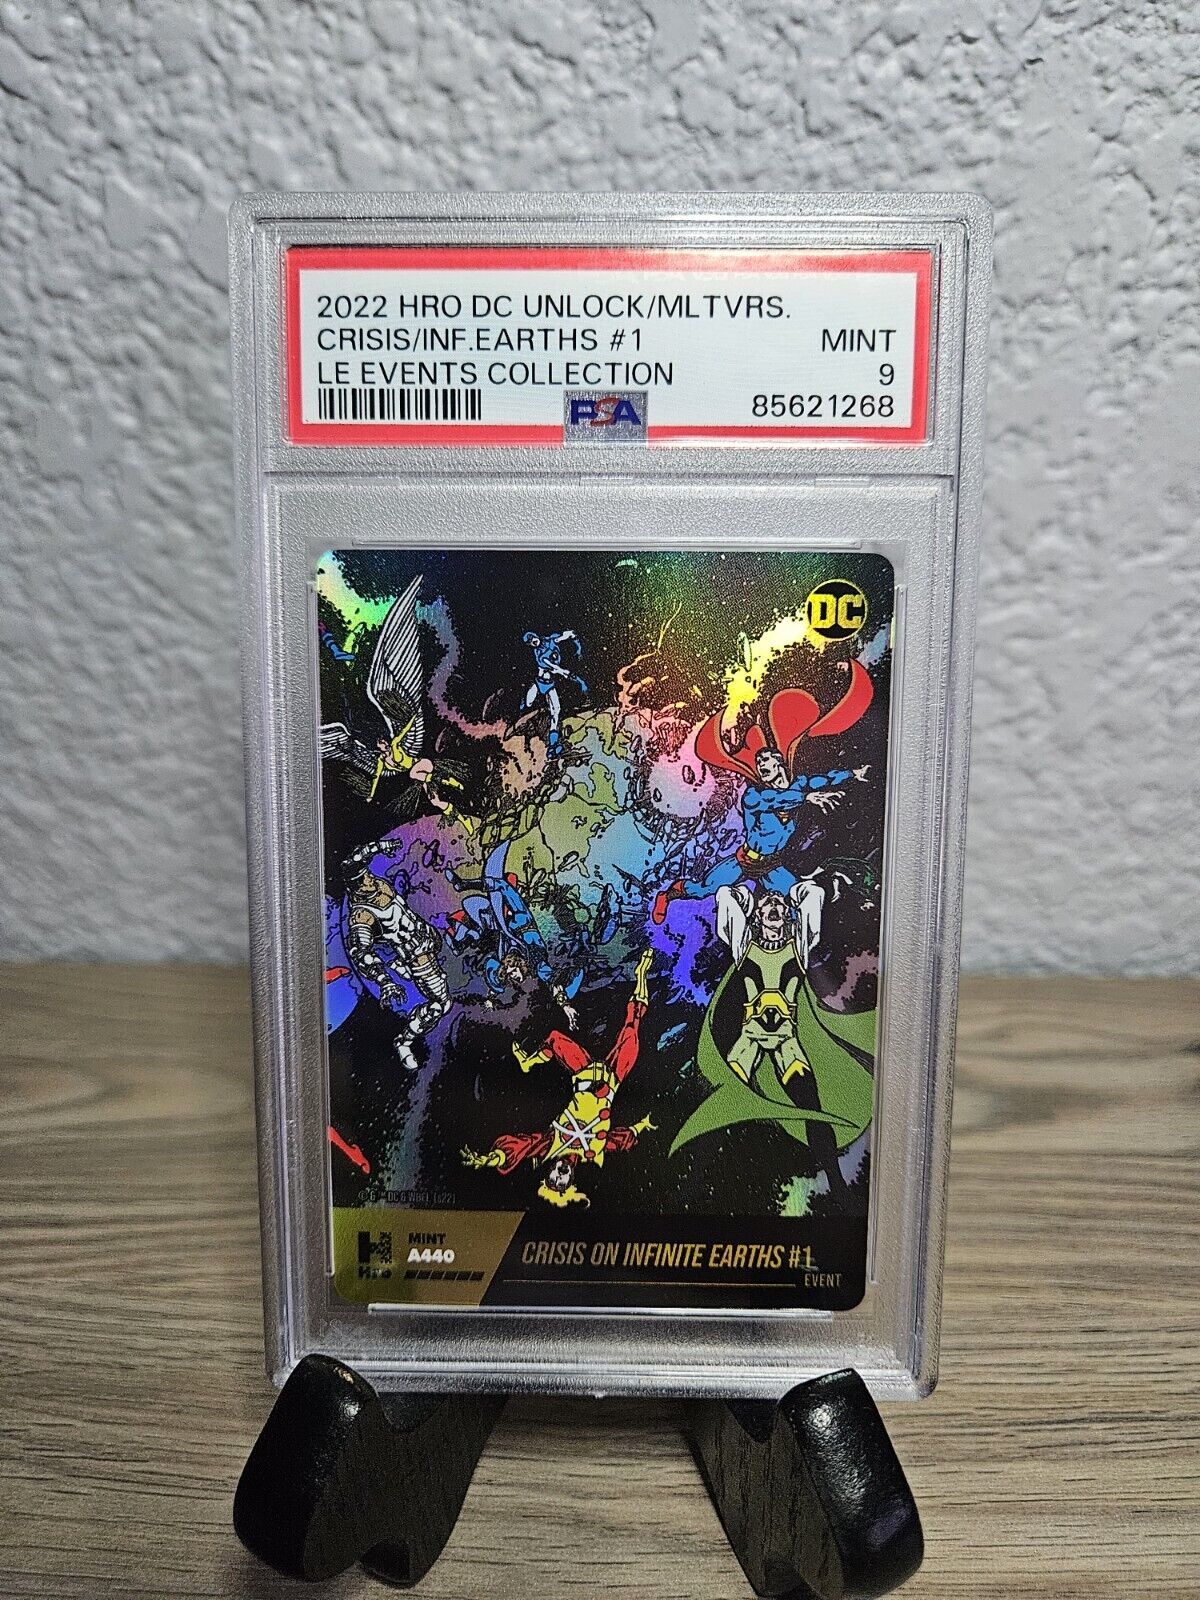 DC Events Mythic Crisis on Infinite Earths #1 A440 PSA 9 Physical Card only